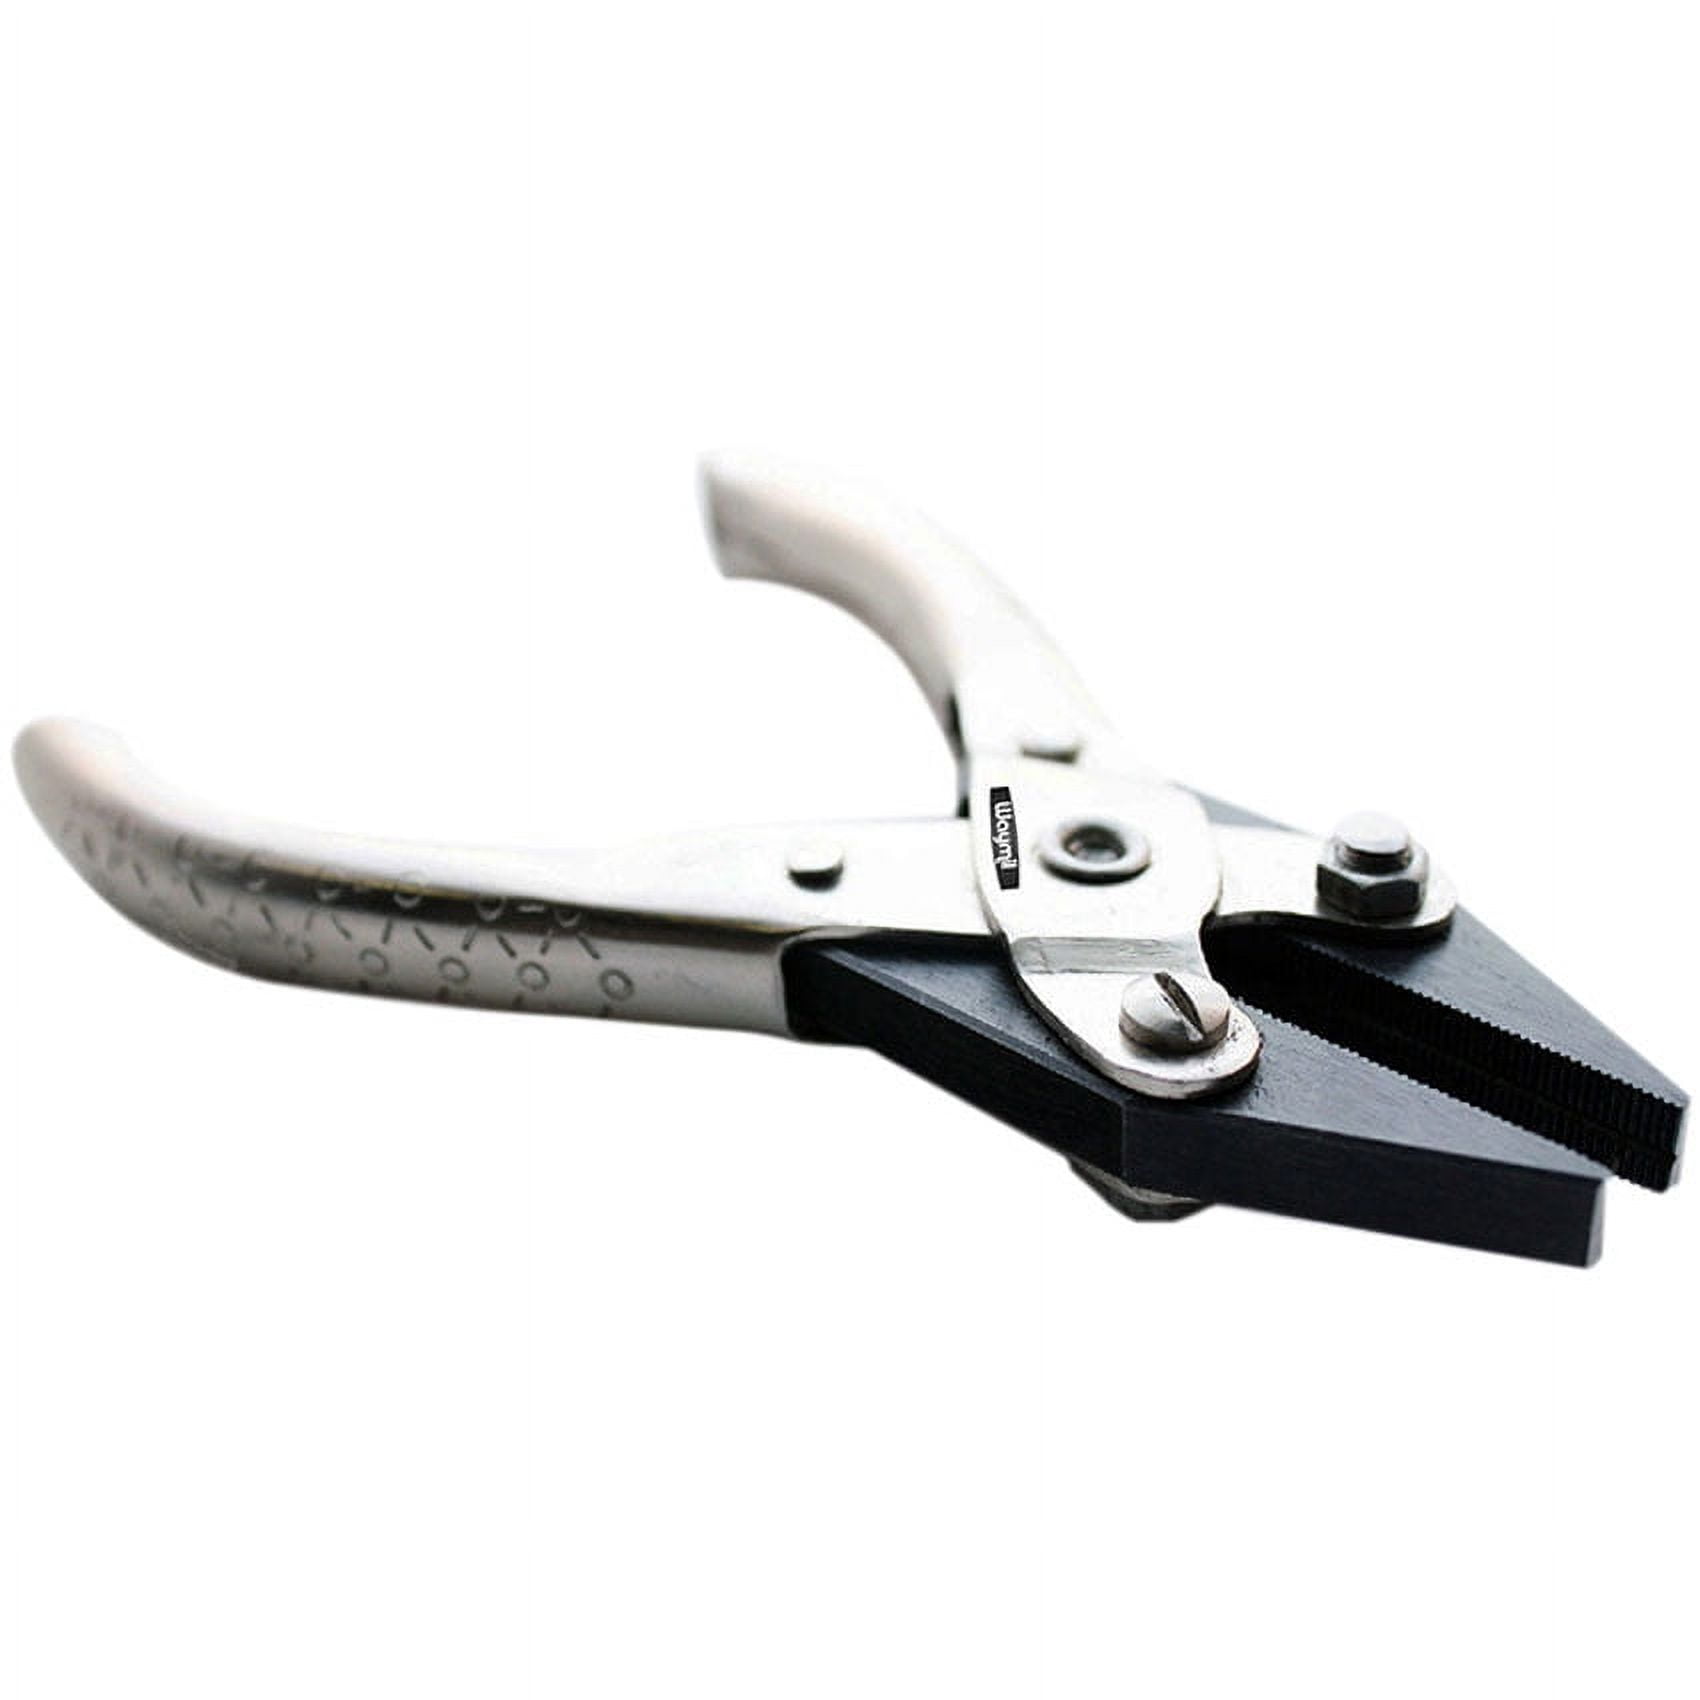 Parallel Action Pliers - Combination, 5”, Serrated